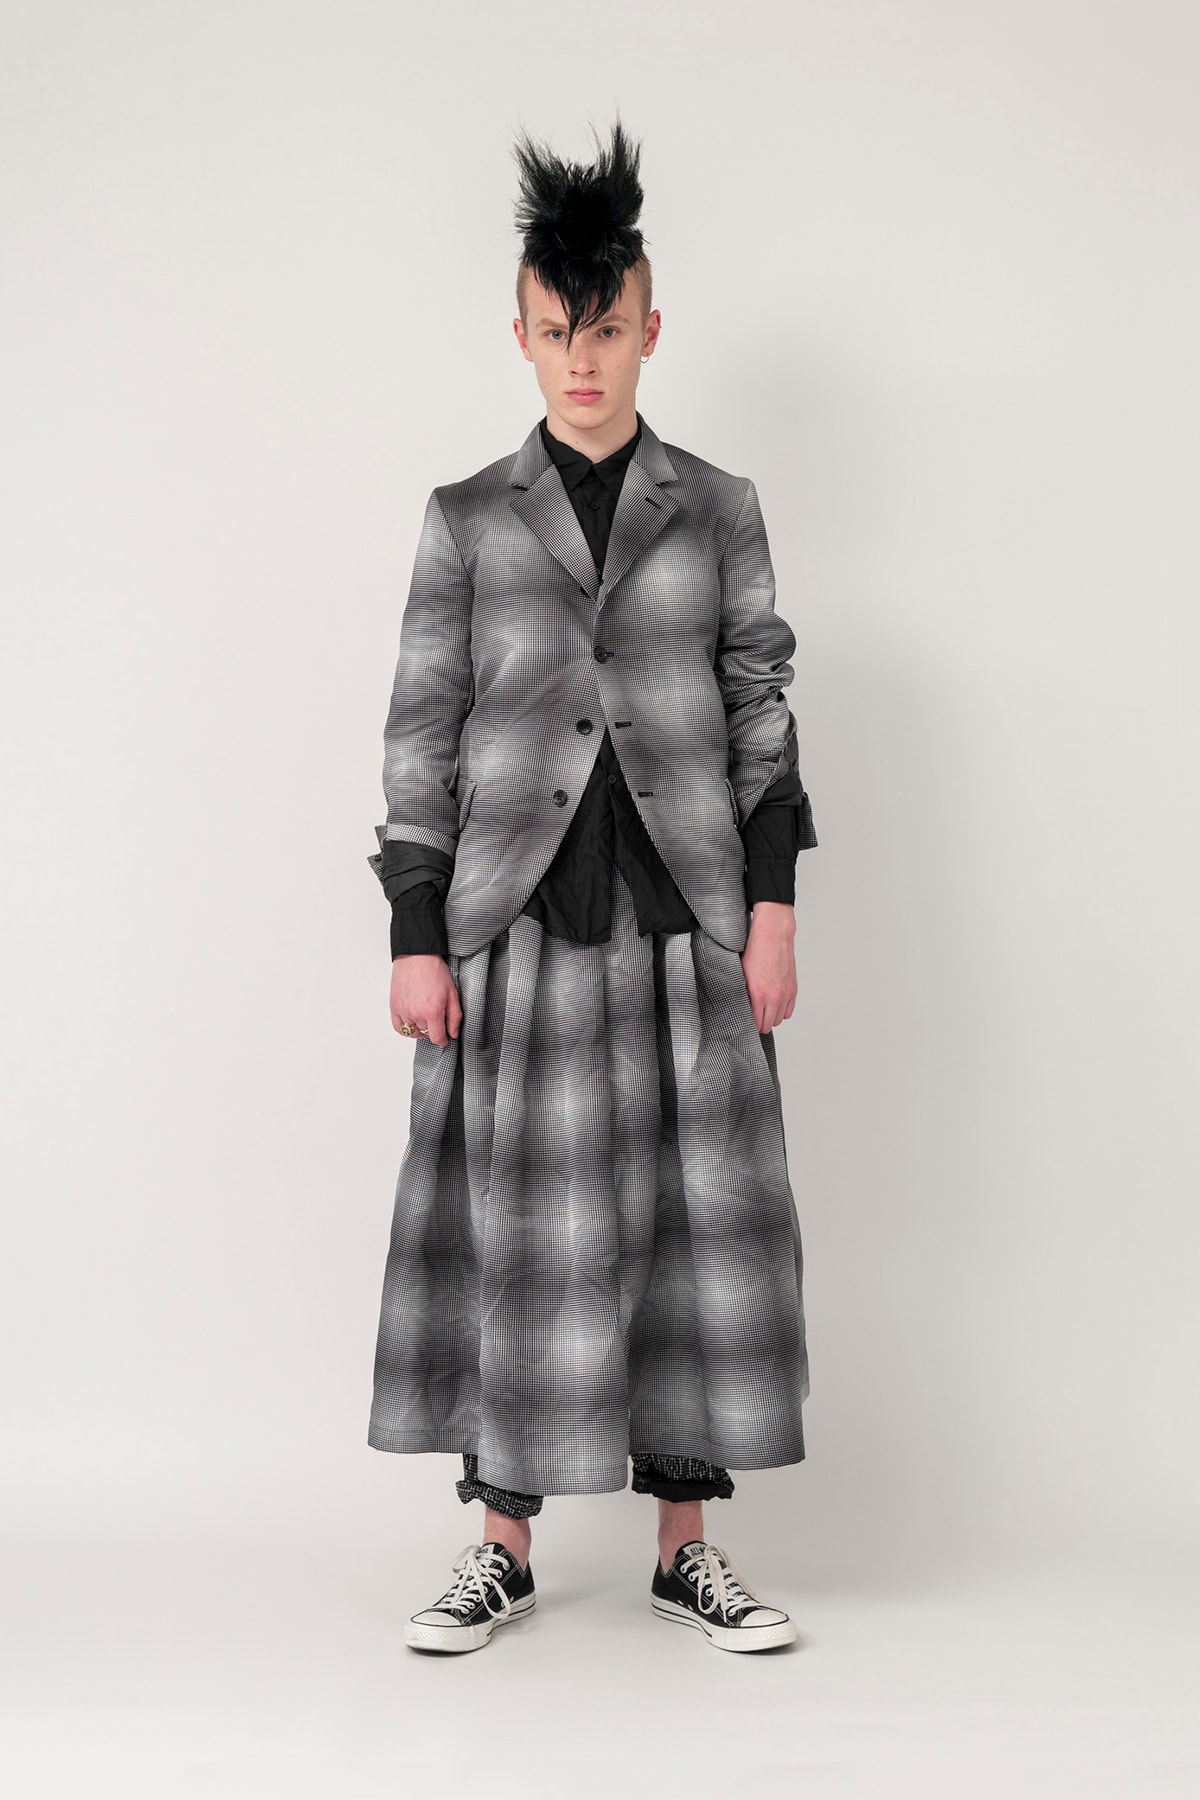 Nike x BLACK COMME des GARCONS Fall/Winter 2019 Collection Jacket Skirt Plaid Mens